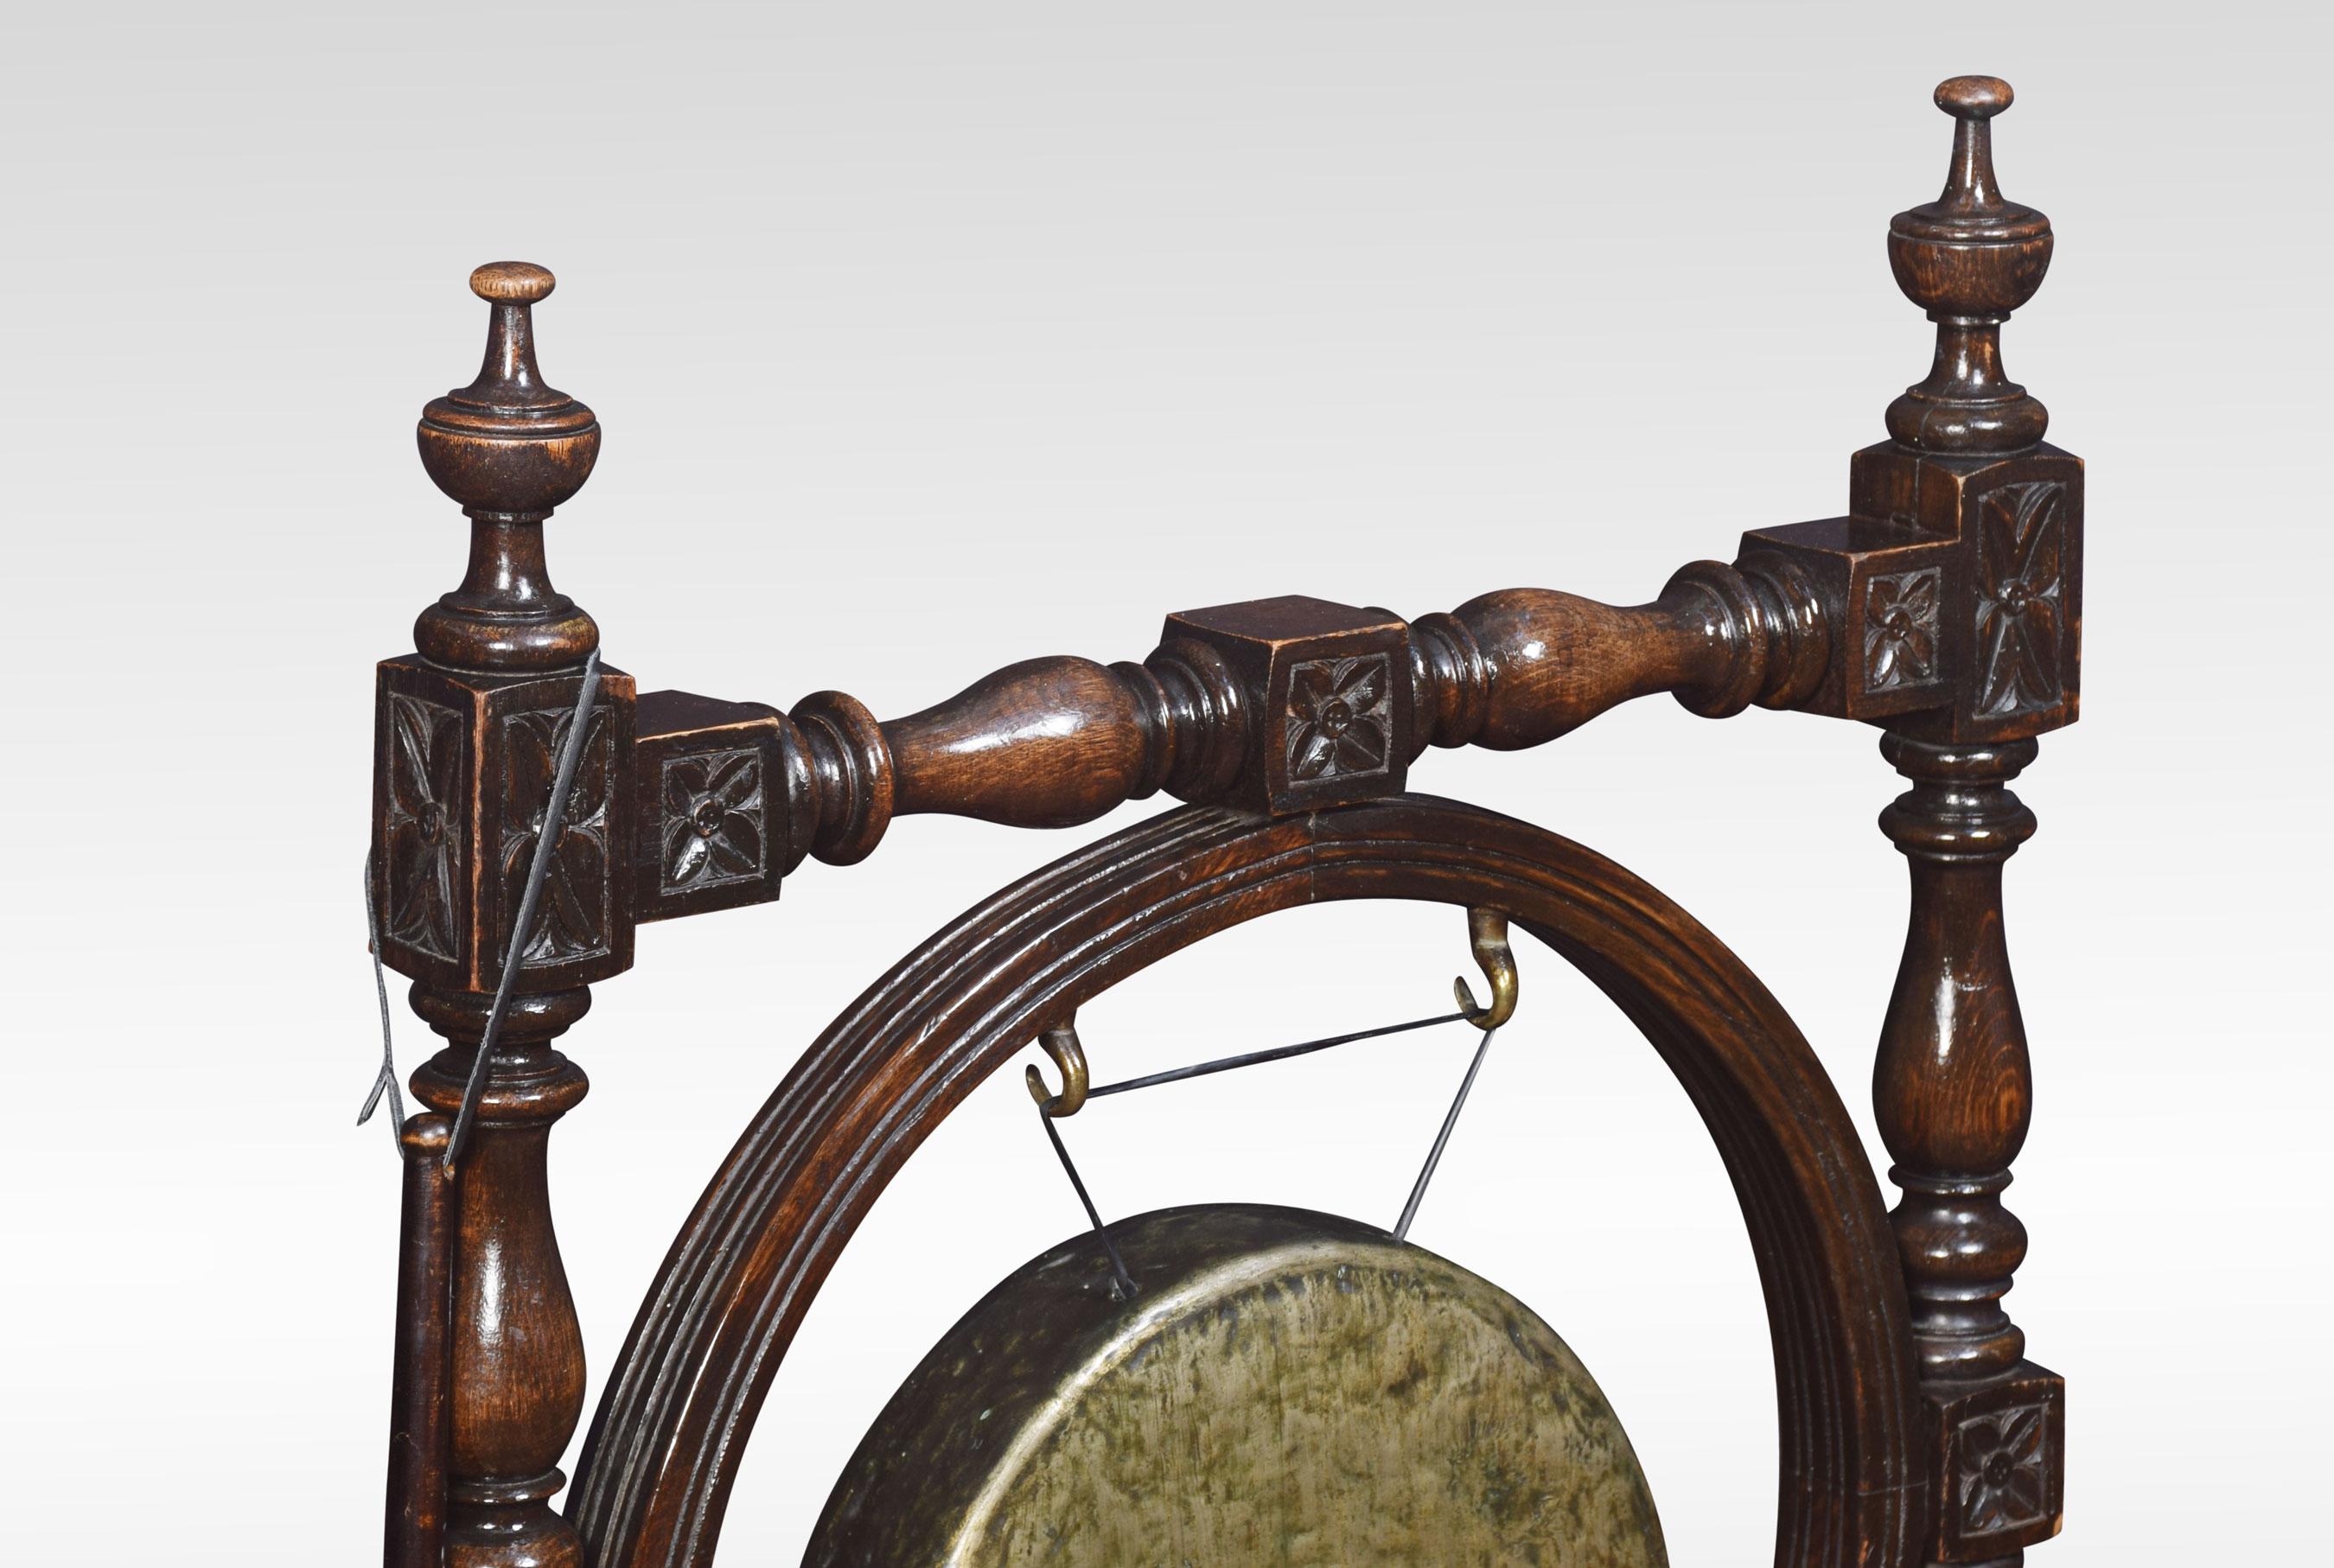 Carved oak dinner gong, the frame with turned finials above carved frame supporting the circular brass gong. Raised up on carved trestle base, together with the striker.
Dimensions:
Height 38 inches
Width 27 inches
Depth 12 inches.